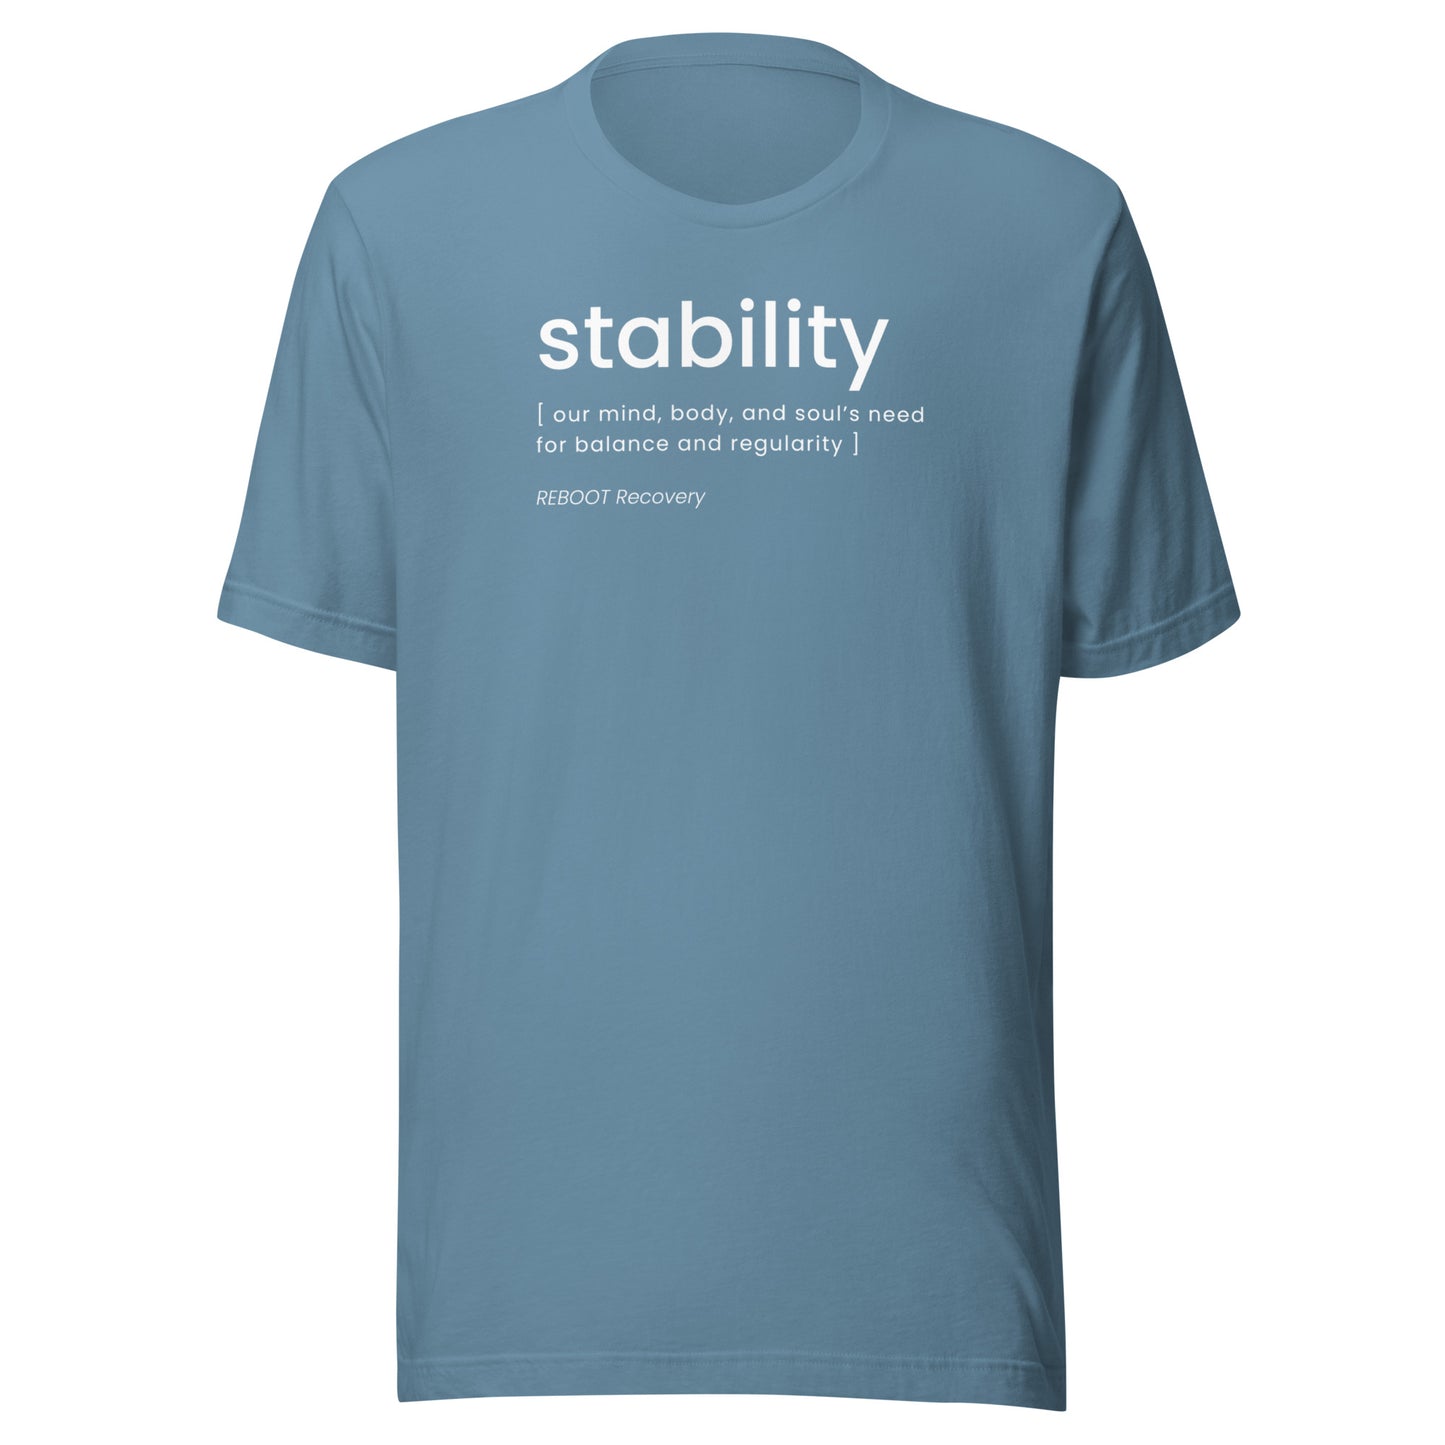 SESSION 11: Stability T-Shirt